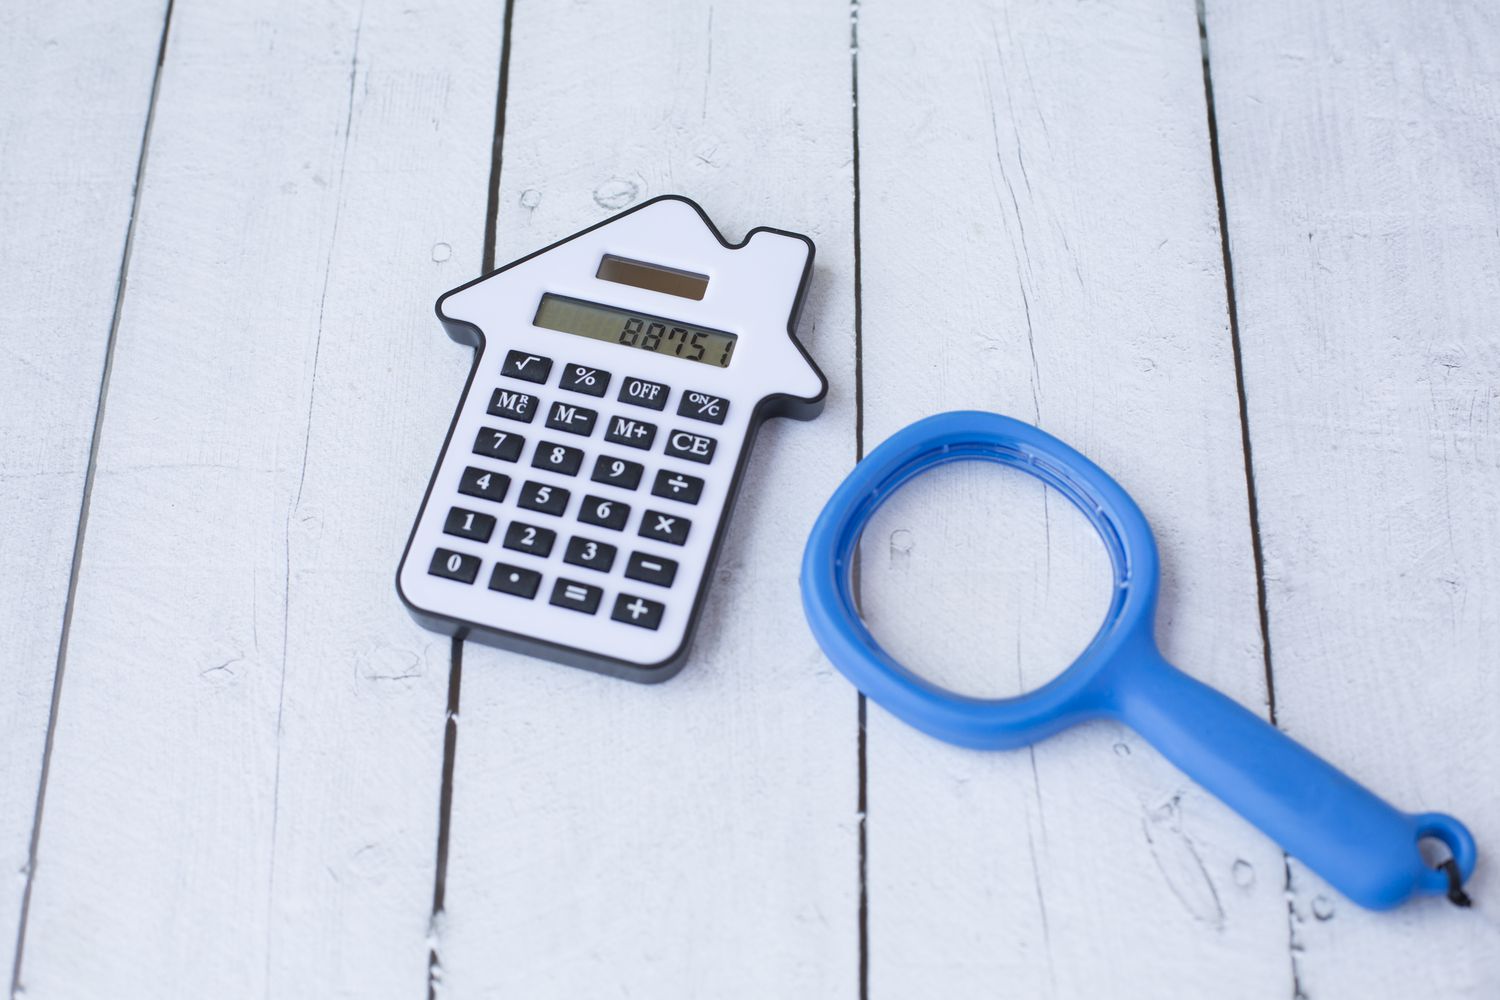 Get The Most Out Of Your Property Using The EMI Calculator For Home Loan